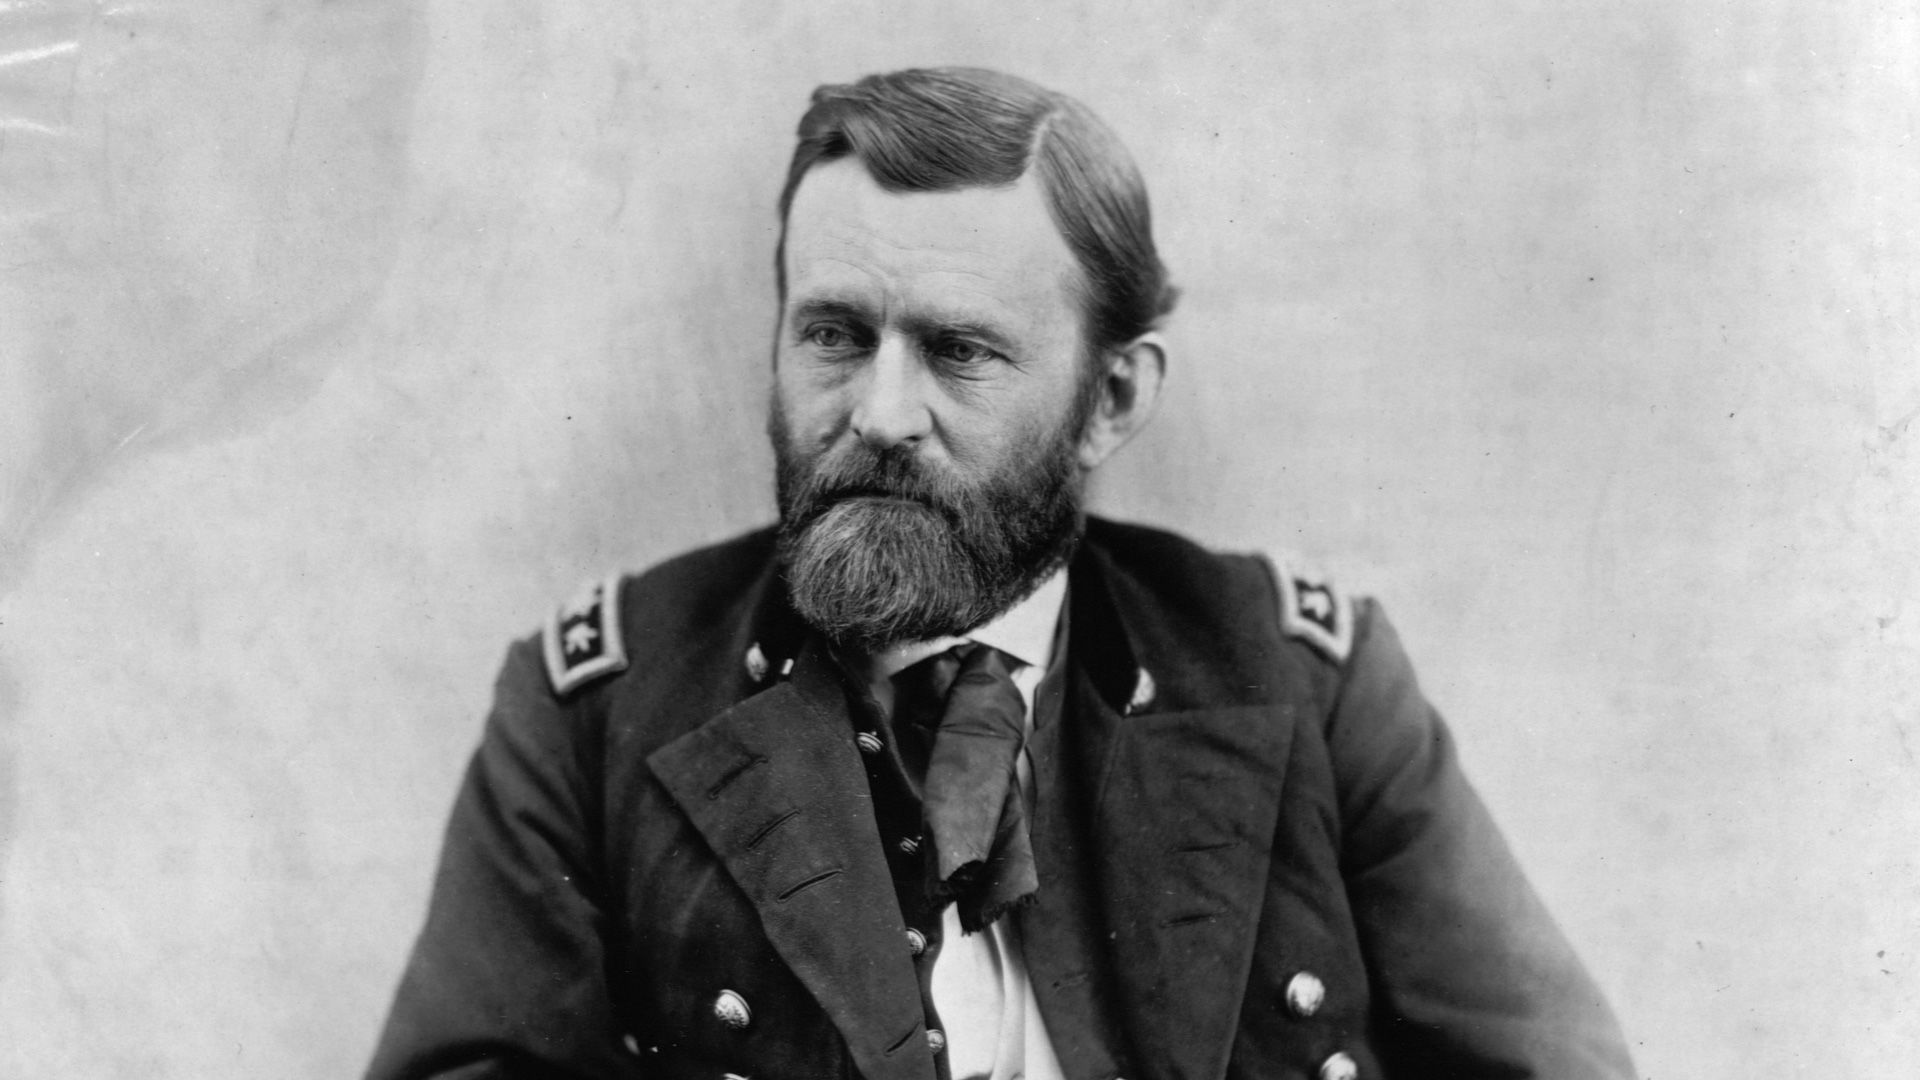 Topic: Read More About the life of Ulysses S. Grant